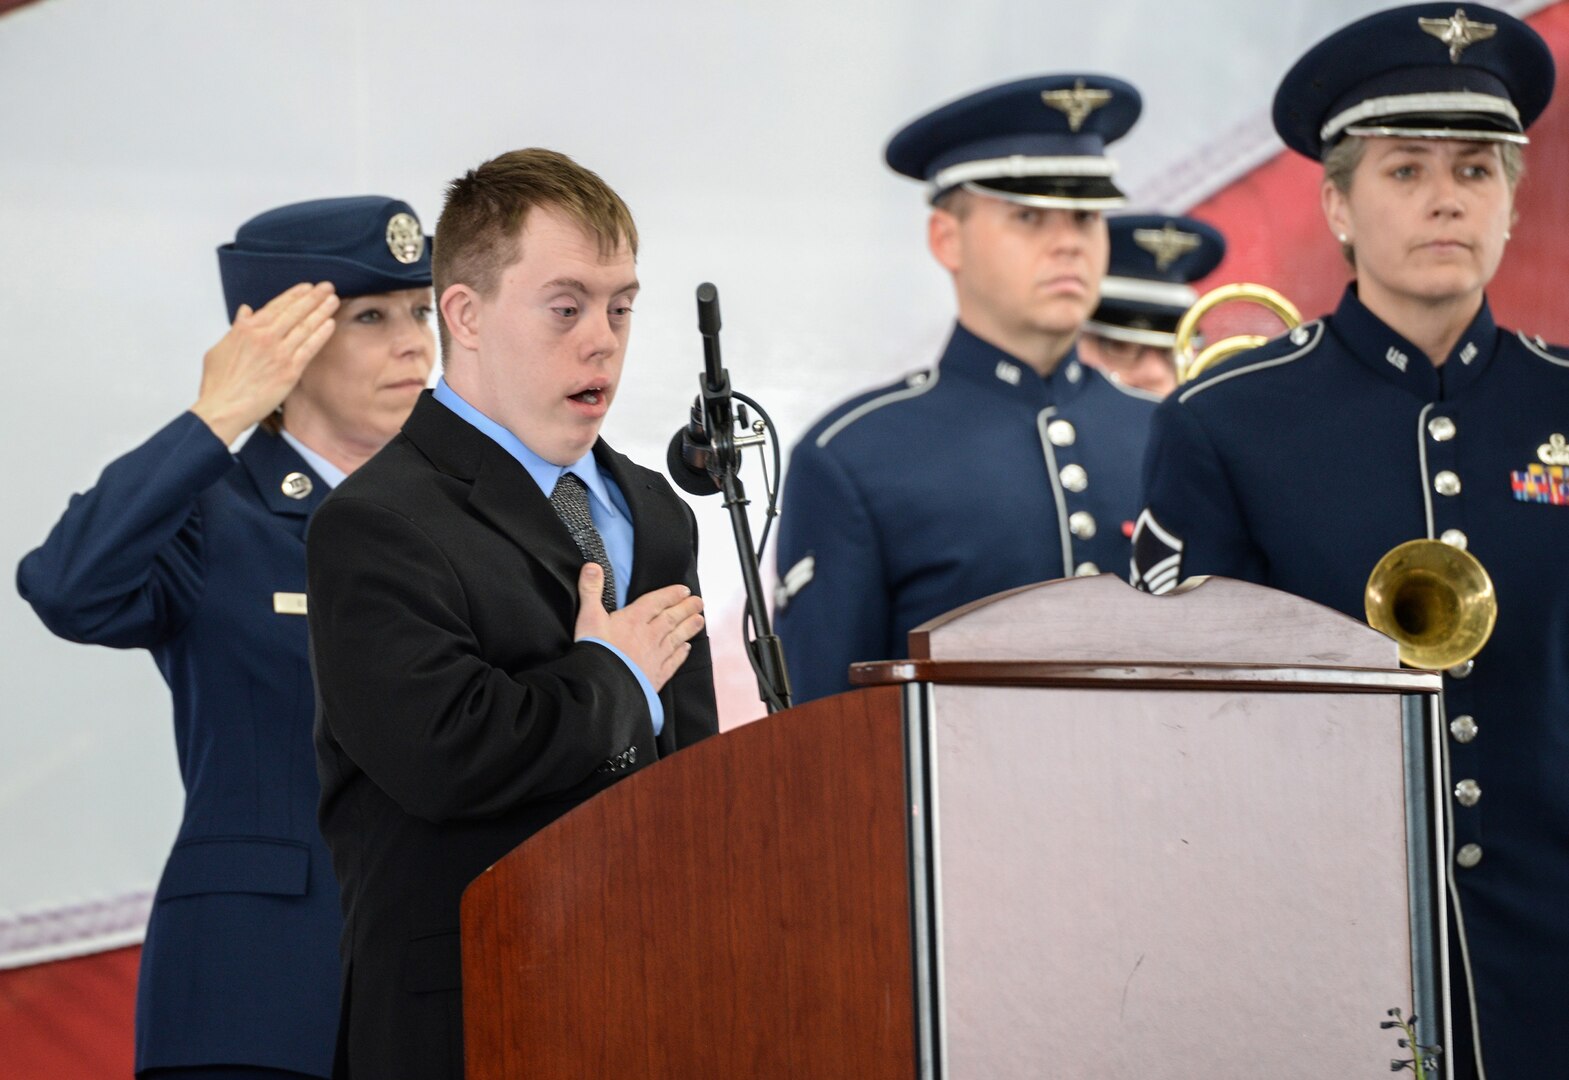 Aaron Cole, a grandson of retired U.S. Air Force Lt. Col. Richard “Dick” E. Cole, sings the national anthem during a memorial service for his grandfather at Joint Base San Antonio-Randolph April 18. Cole, the last surviving Doolittle Raider, was among 80 Airmen who took part in the storied World War II Doolittle Tokyo Raid and was a founding Airman of the USAF Special Operations community